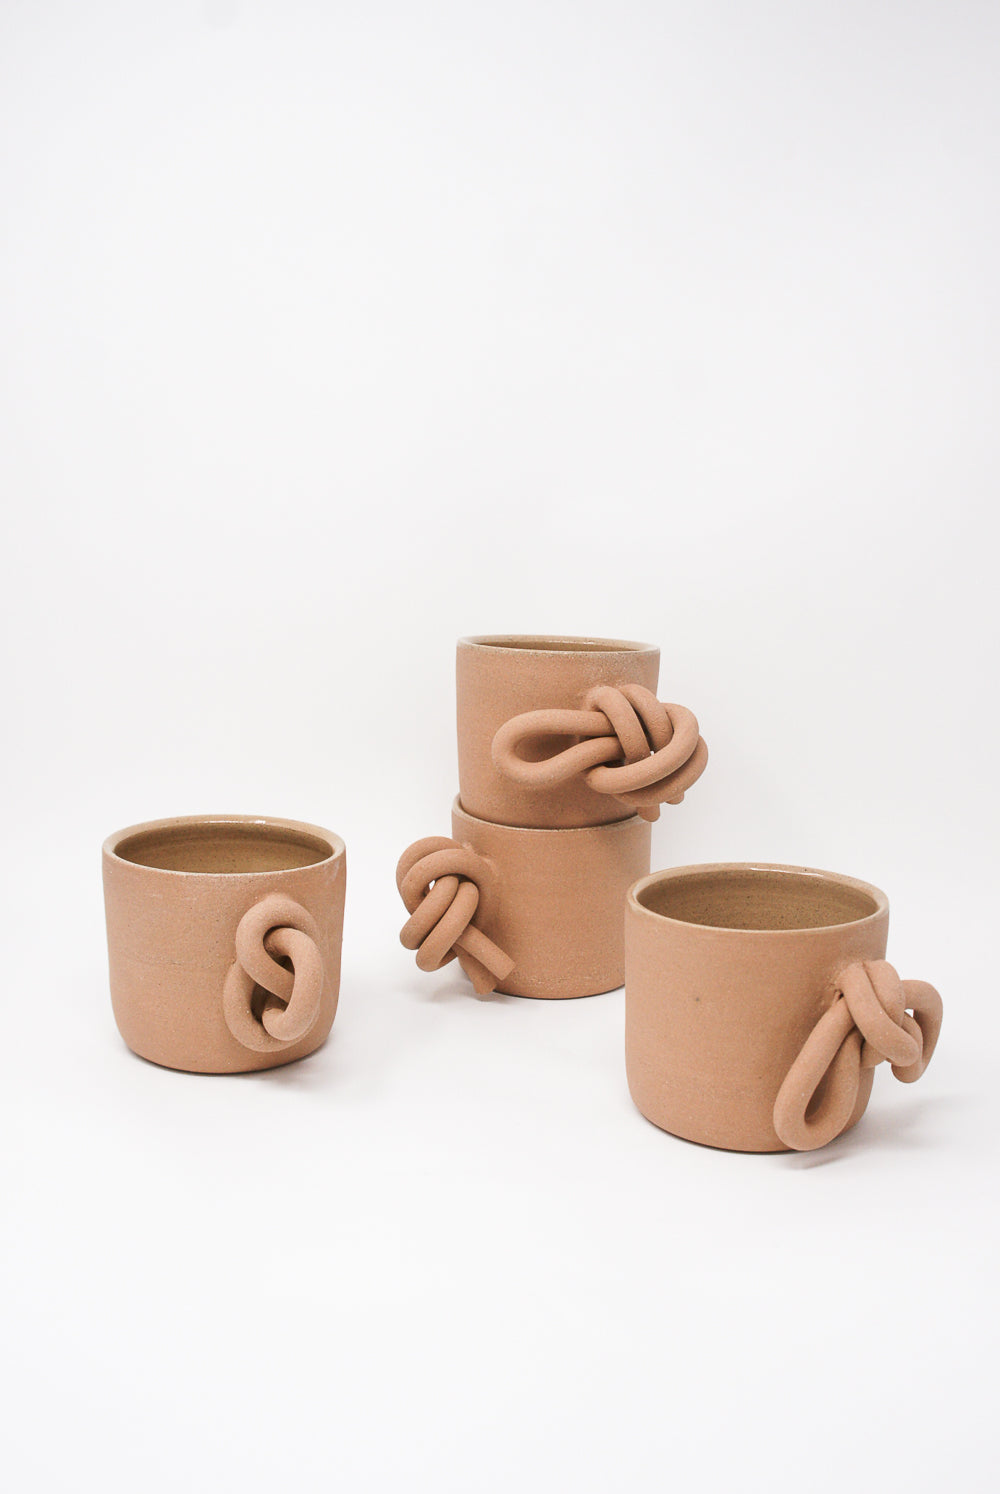 Lost Quarry - Overhand Knot Mug in Terracotta group view